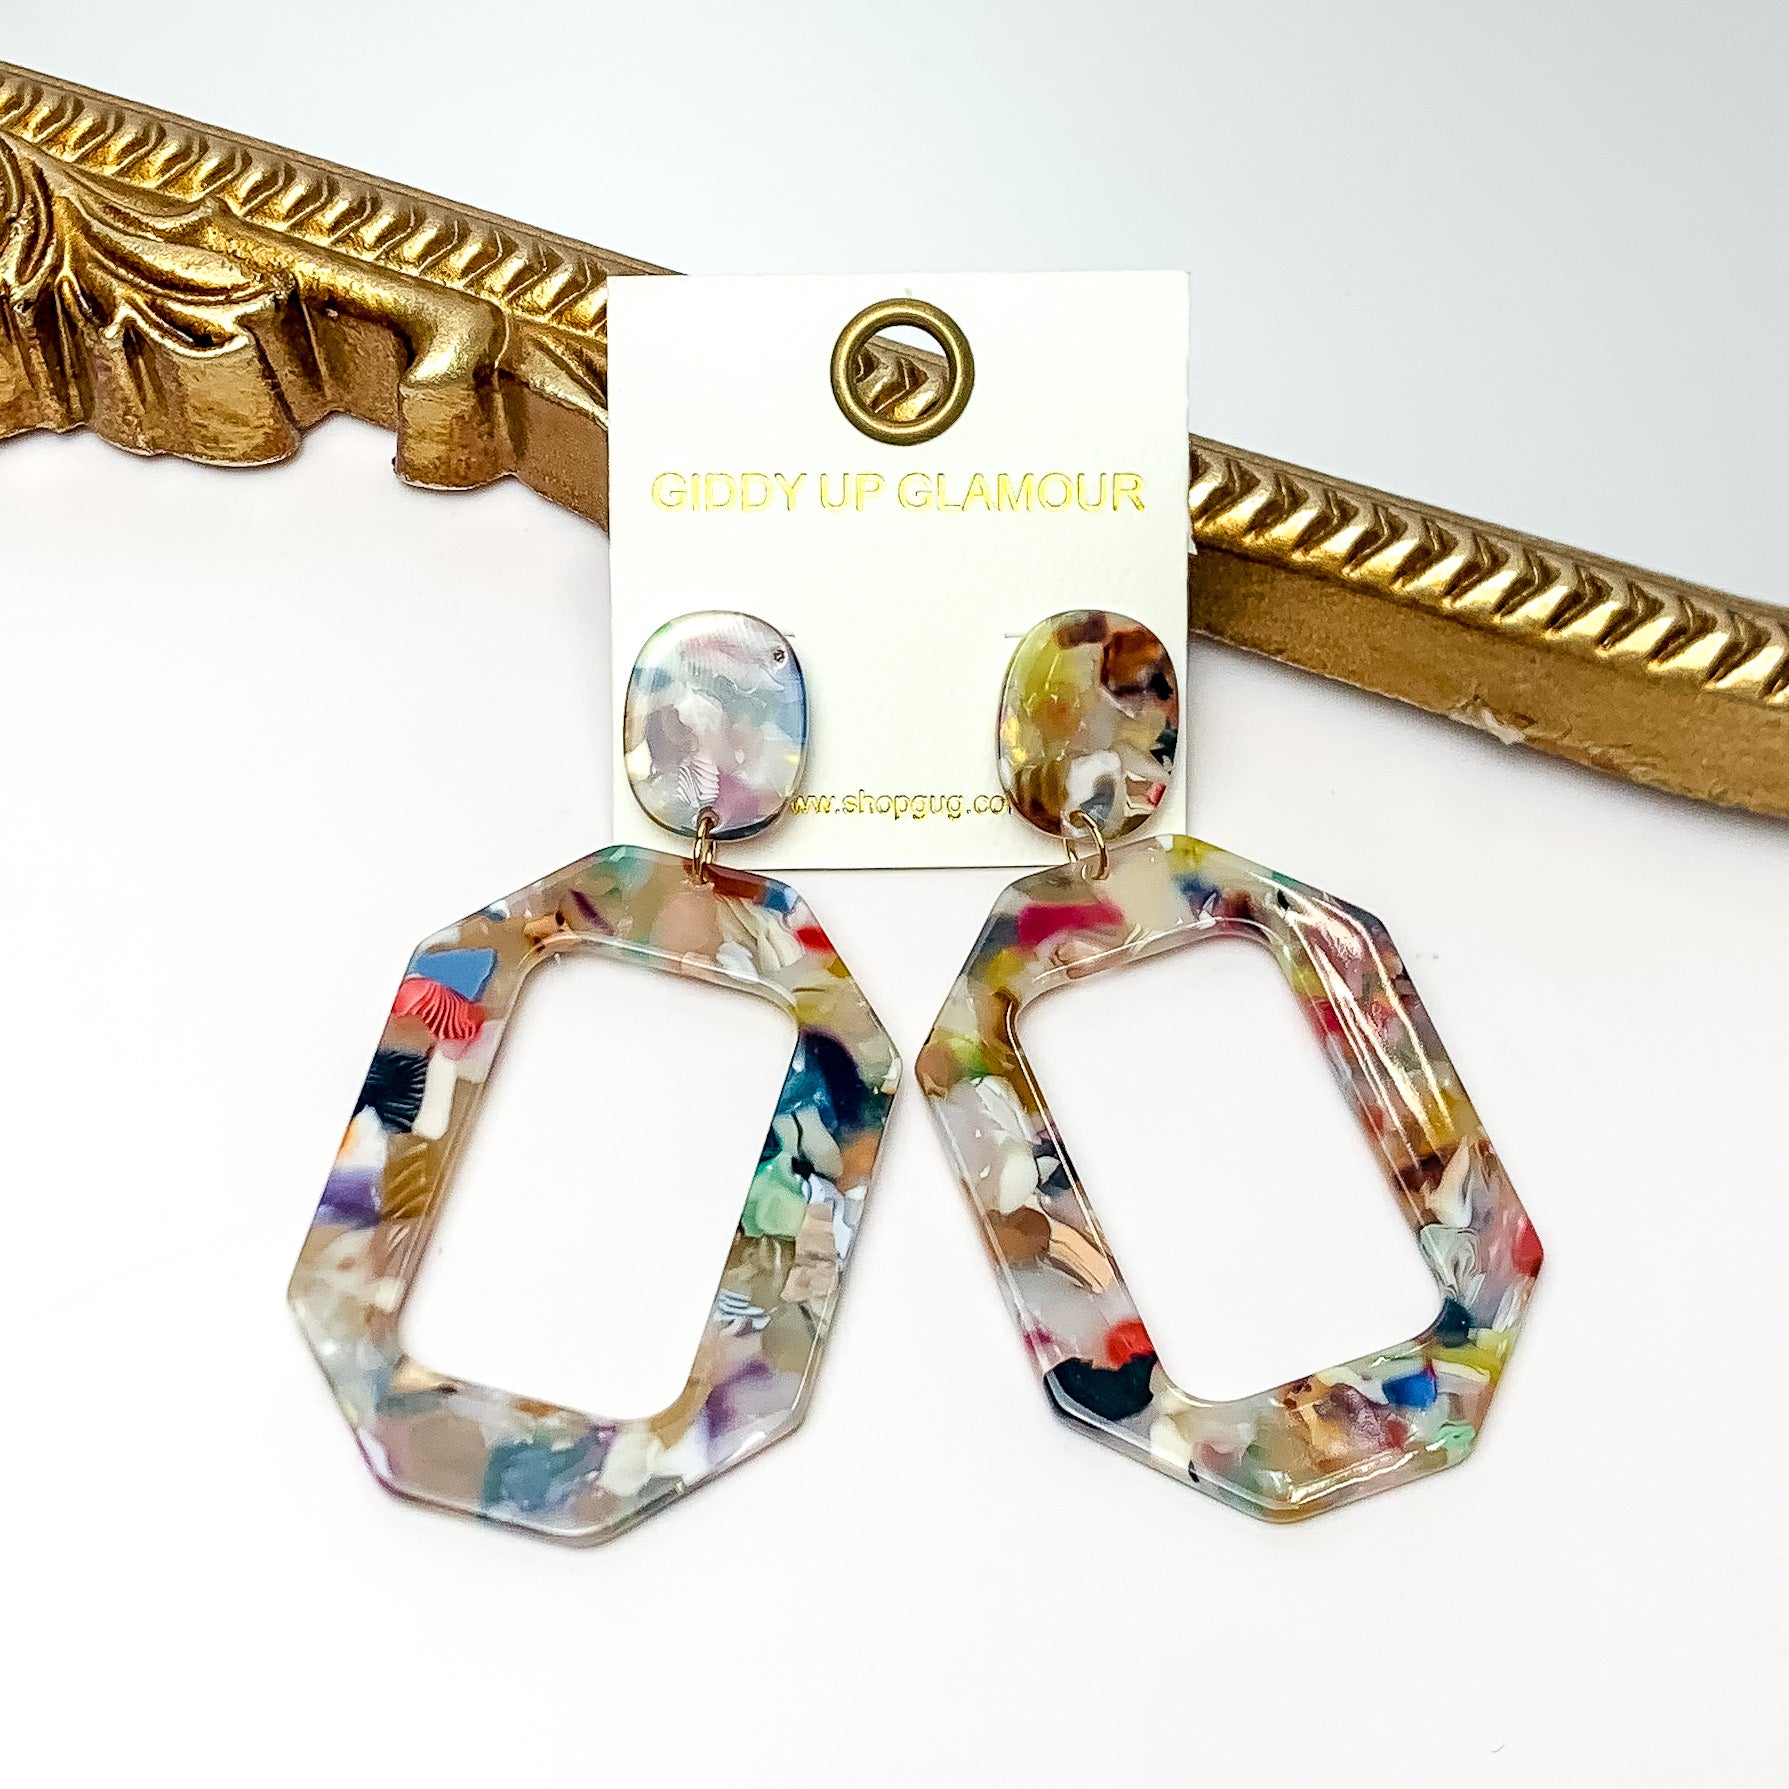 Malibu Marble Open Rectangle Earrings in multicolor. Pictured on a white background with the earrings laying on a gold frame.